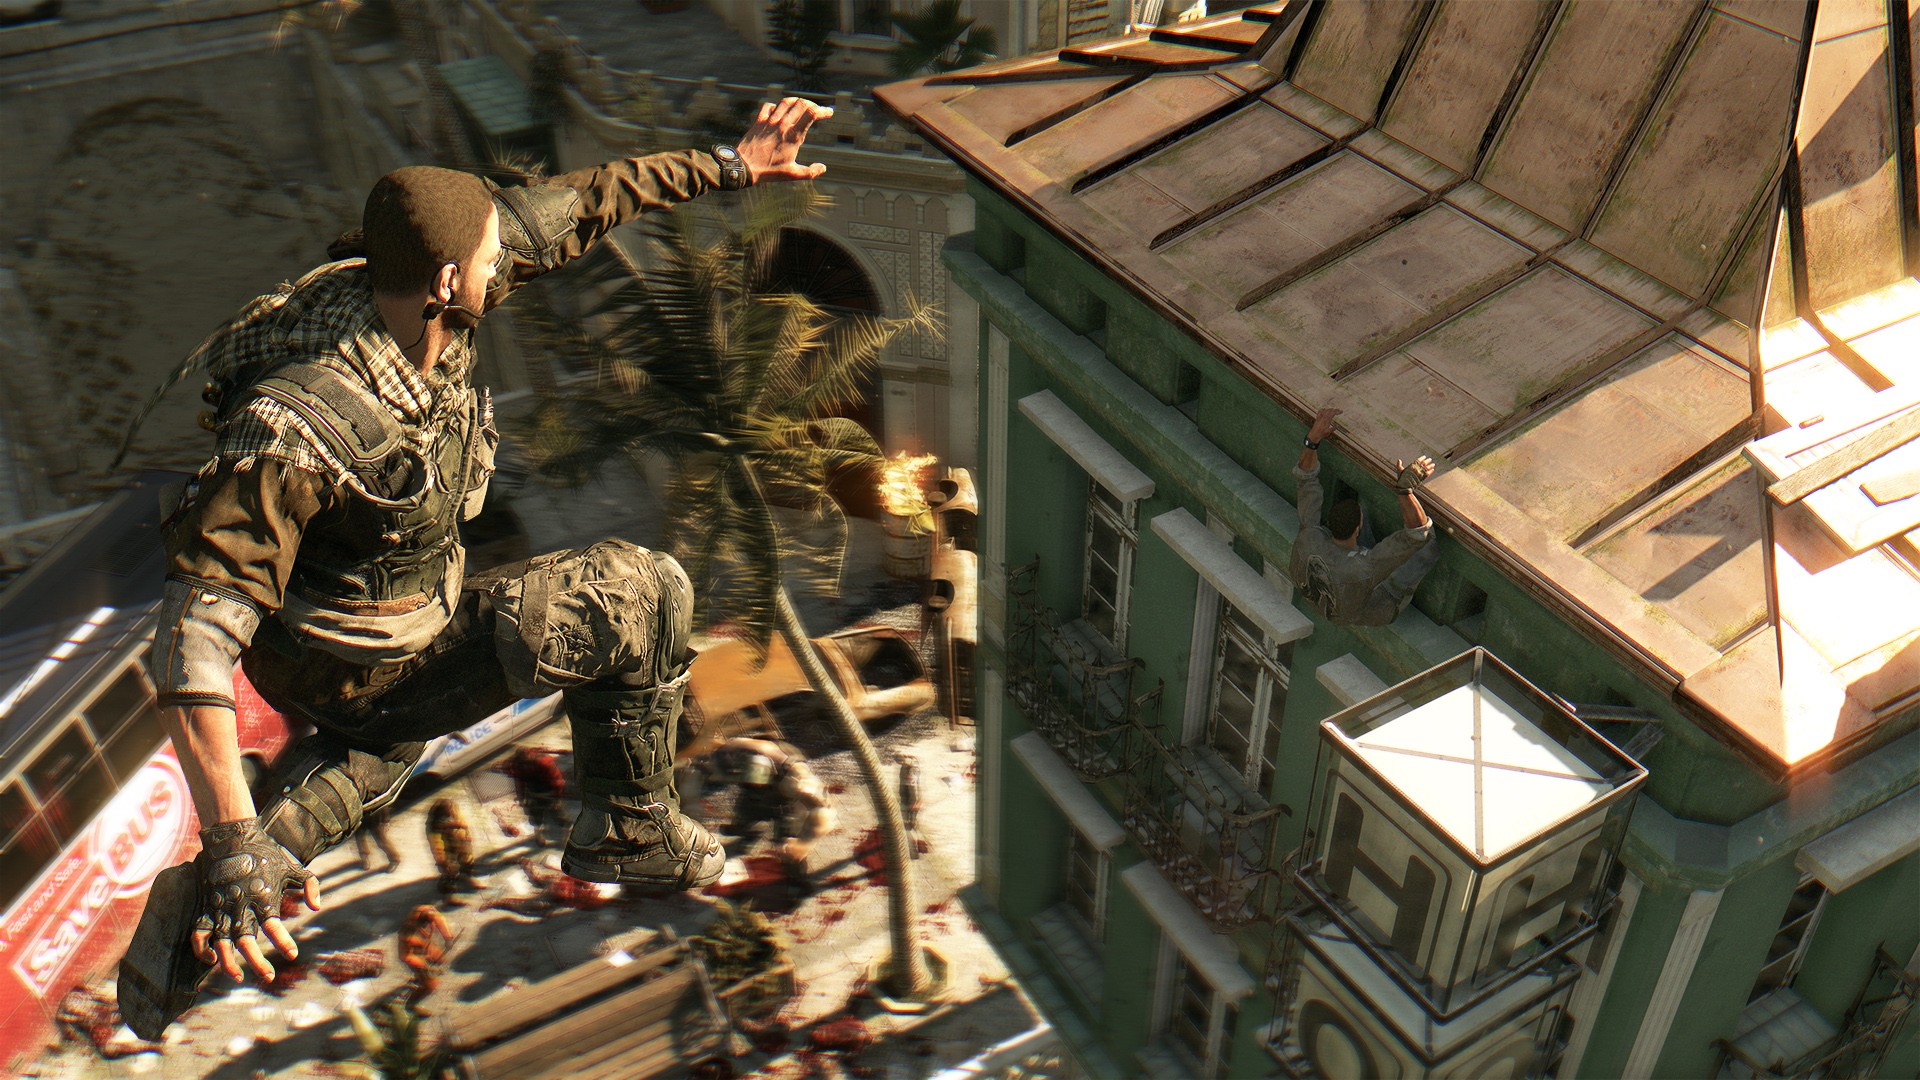 Dying Light: Definitive Edition Review - PSLegends